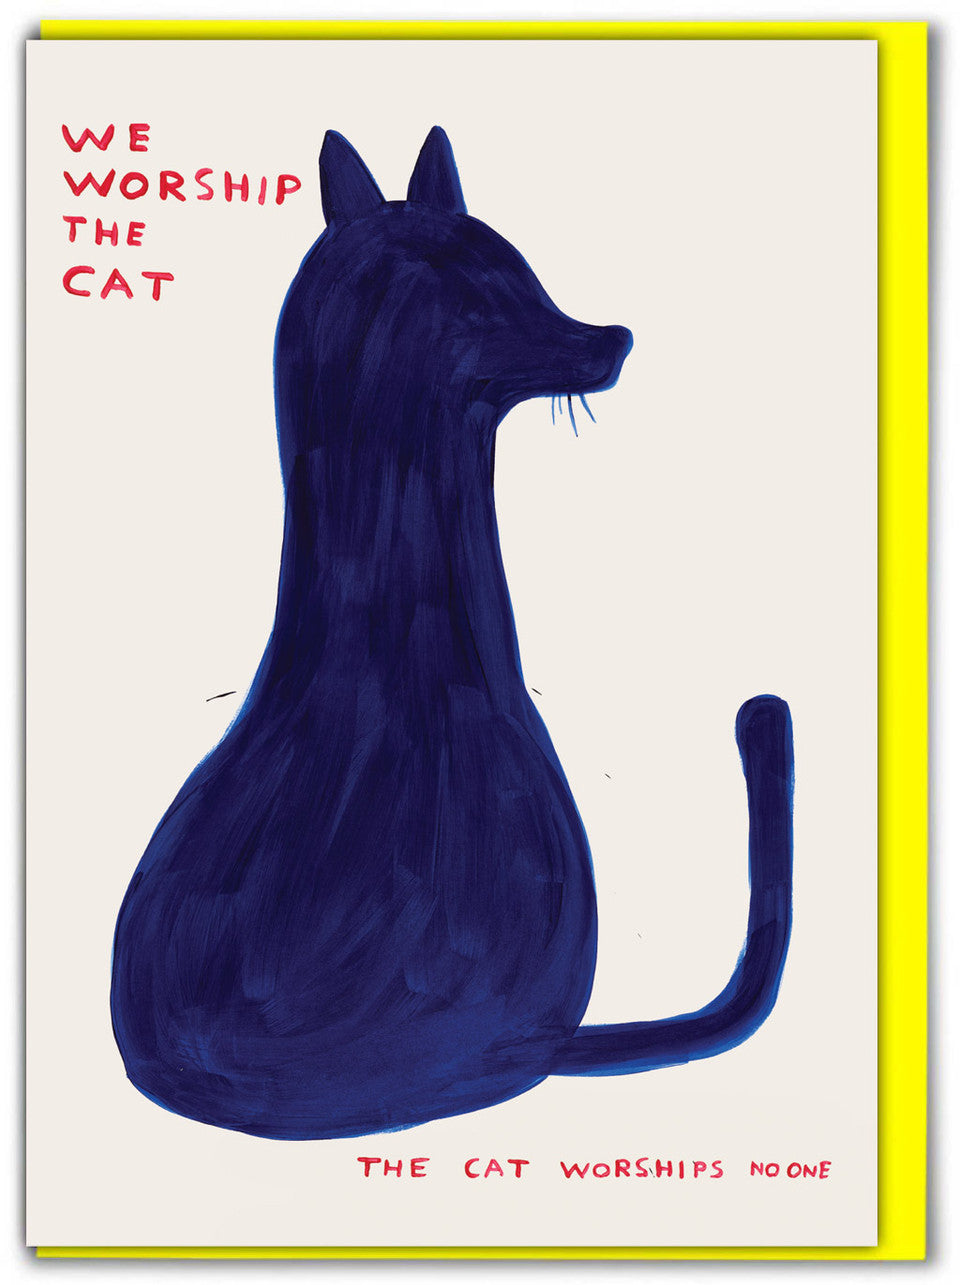 We Worship the Cat by David Shrigley